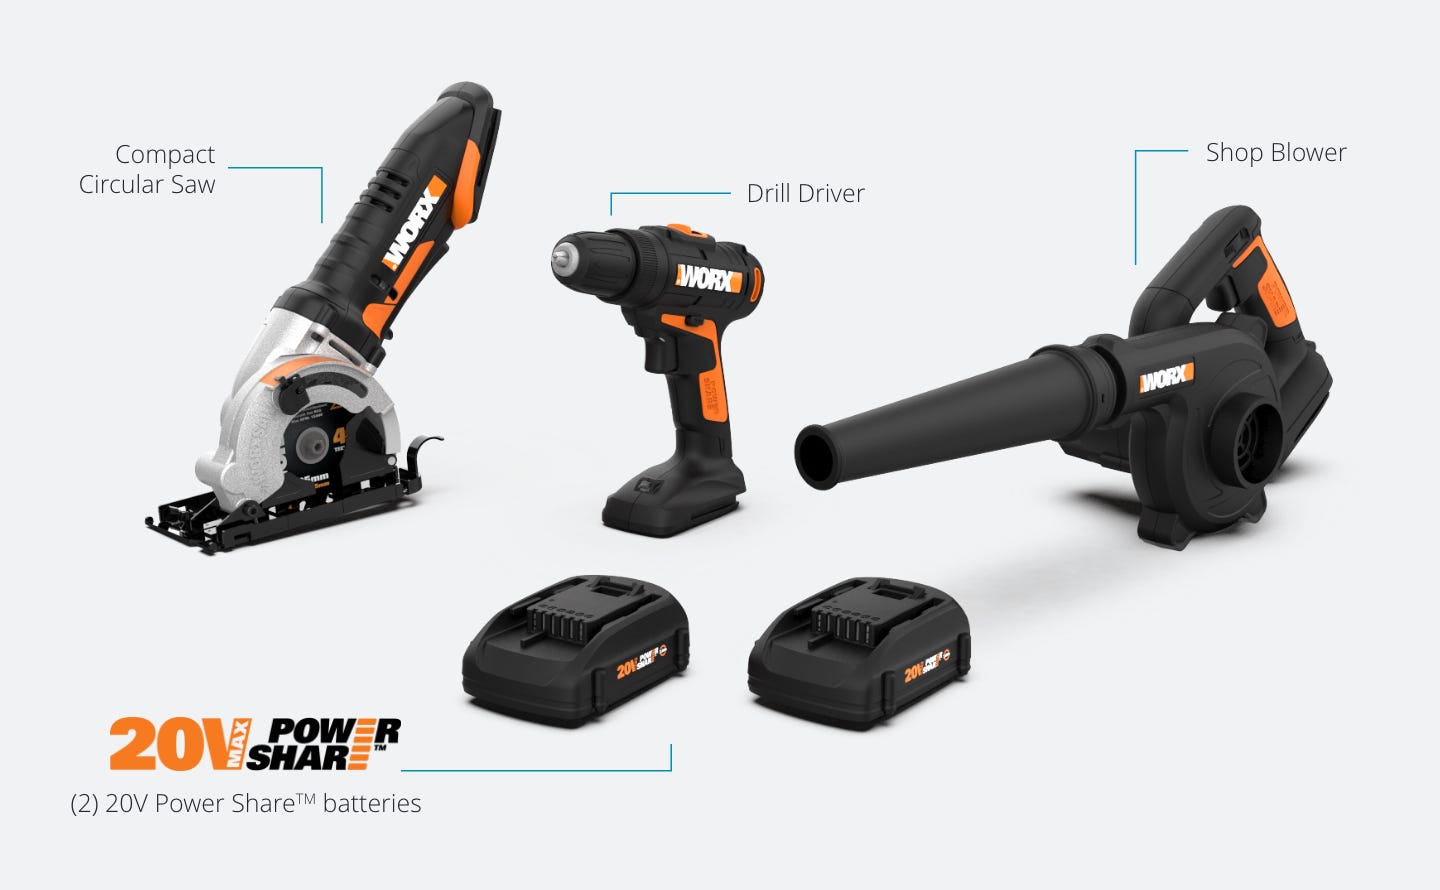 kit contains: compact circular saw, drill driver, 2 power share batteries, shop blower